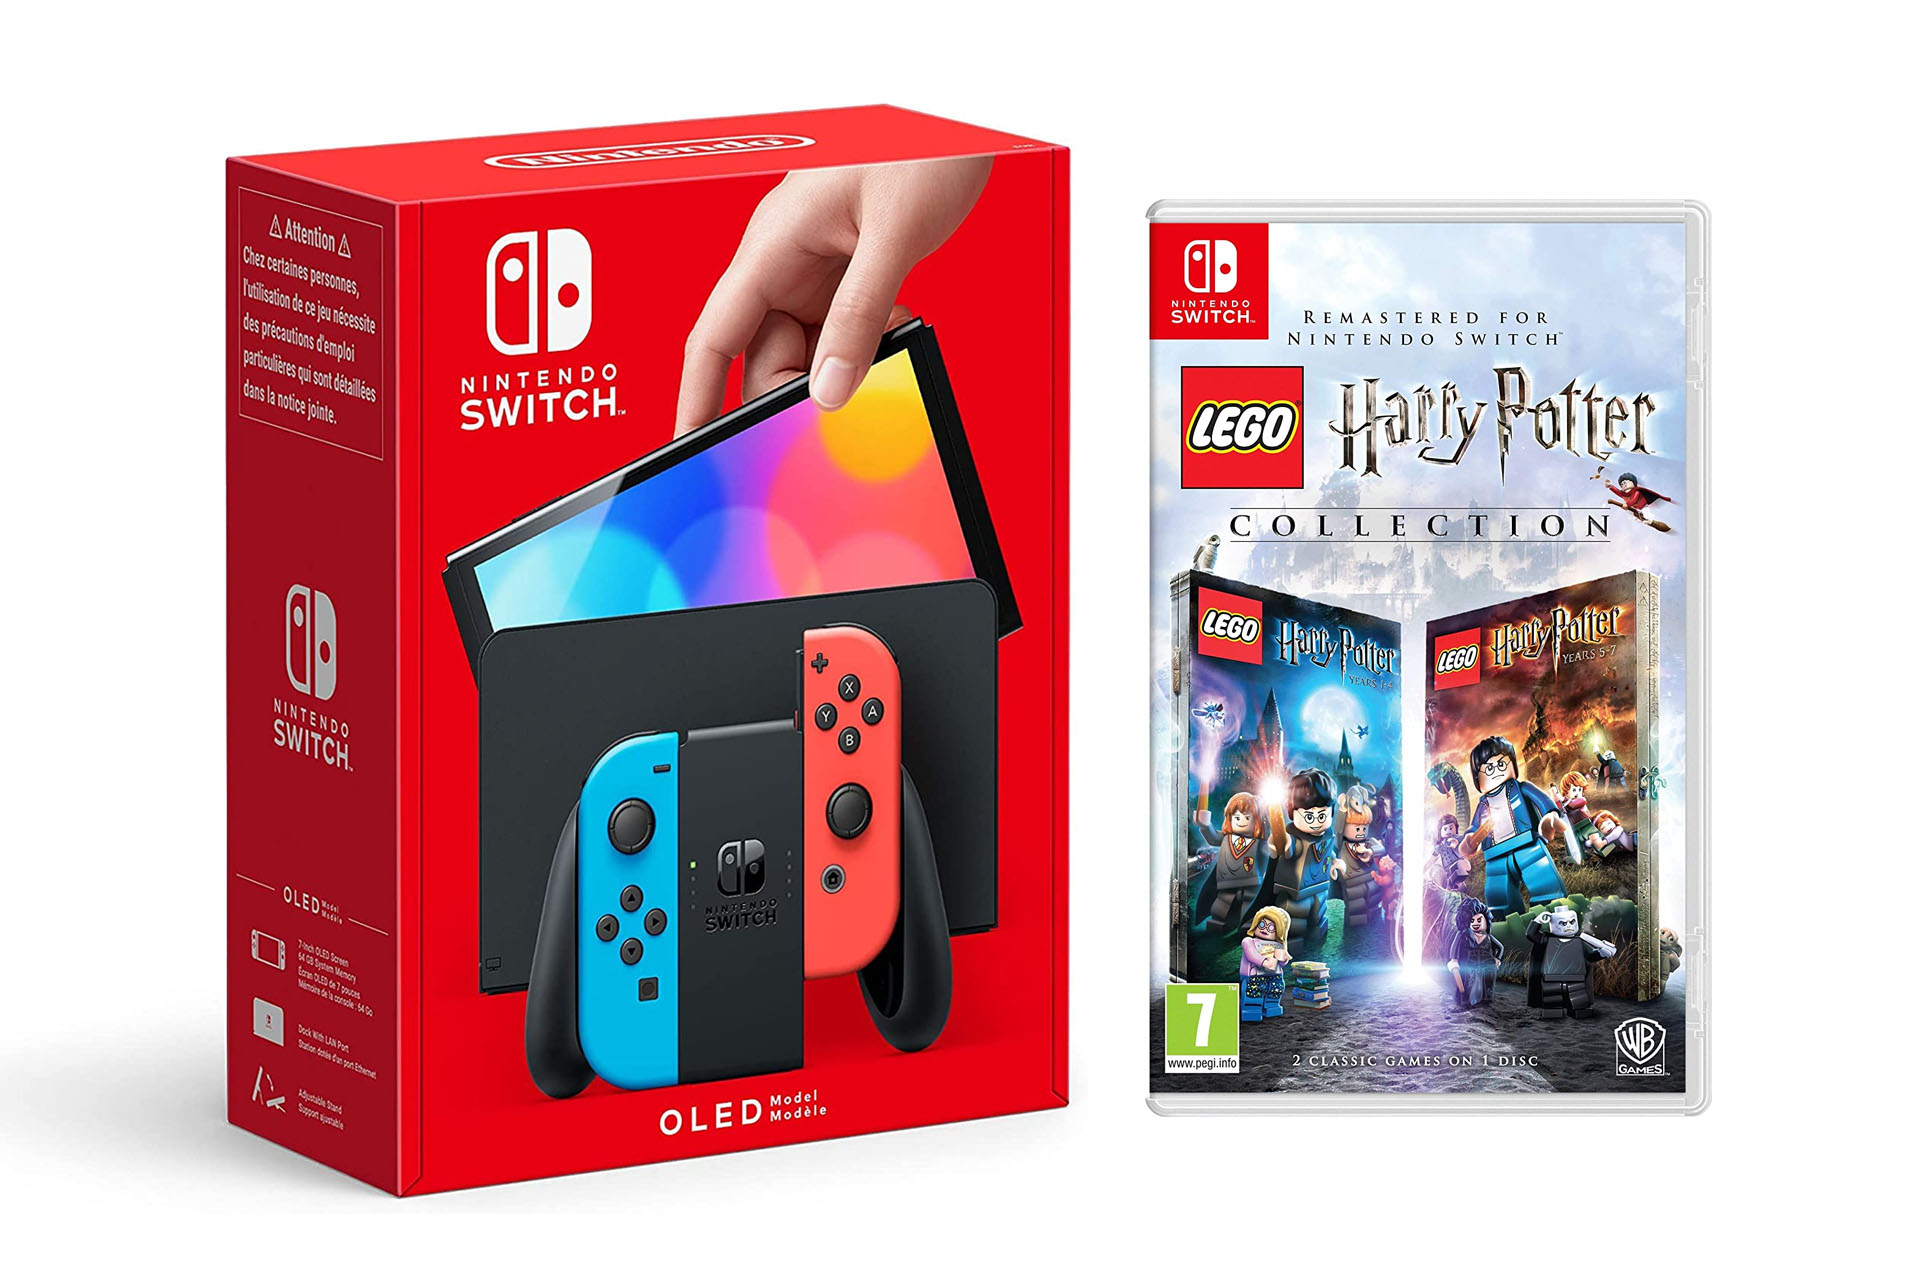 A product shot of the Nintendo Switch OLED and LEGO Harry Potter bundle